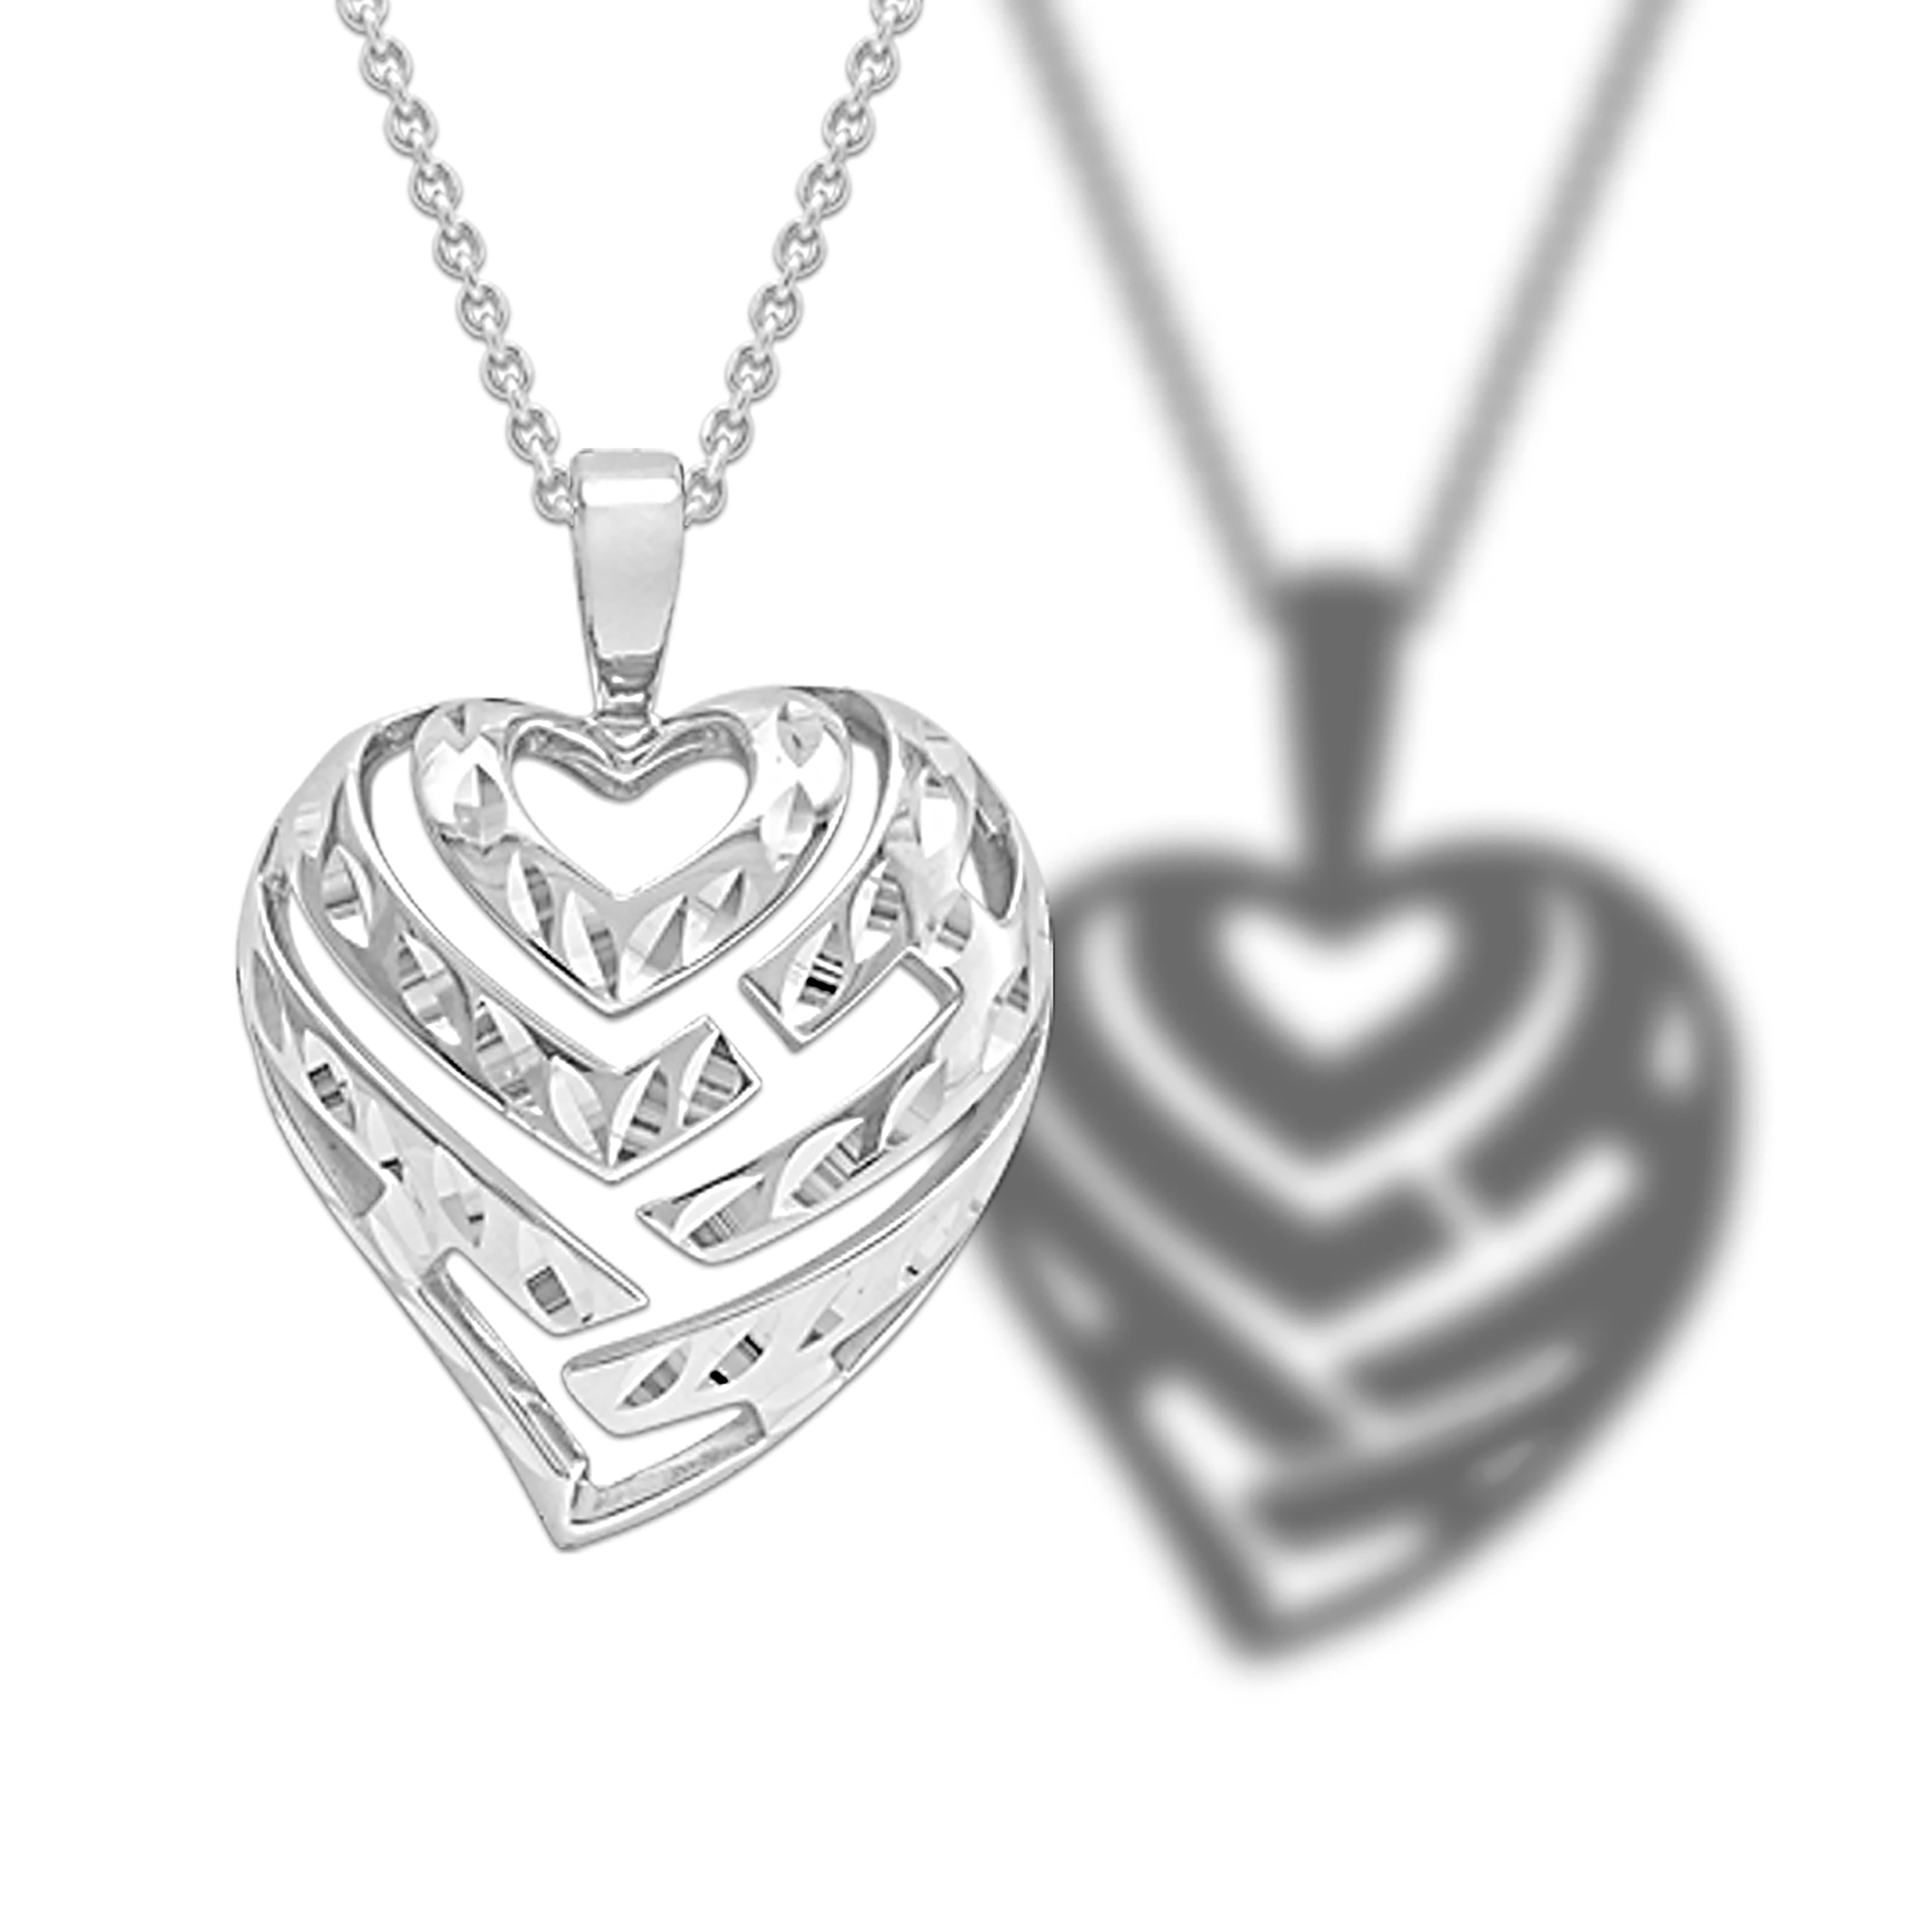 24" Adjustable Aloha Heart Necklace in Sterling Silver - 24mm